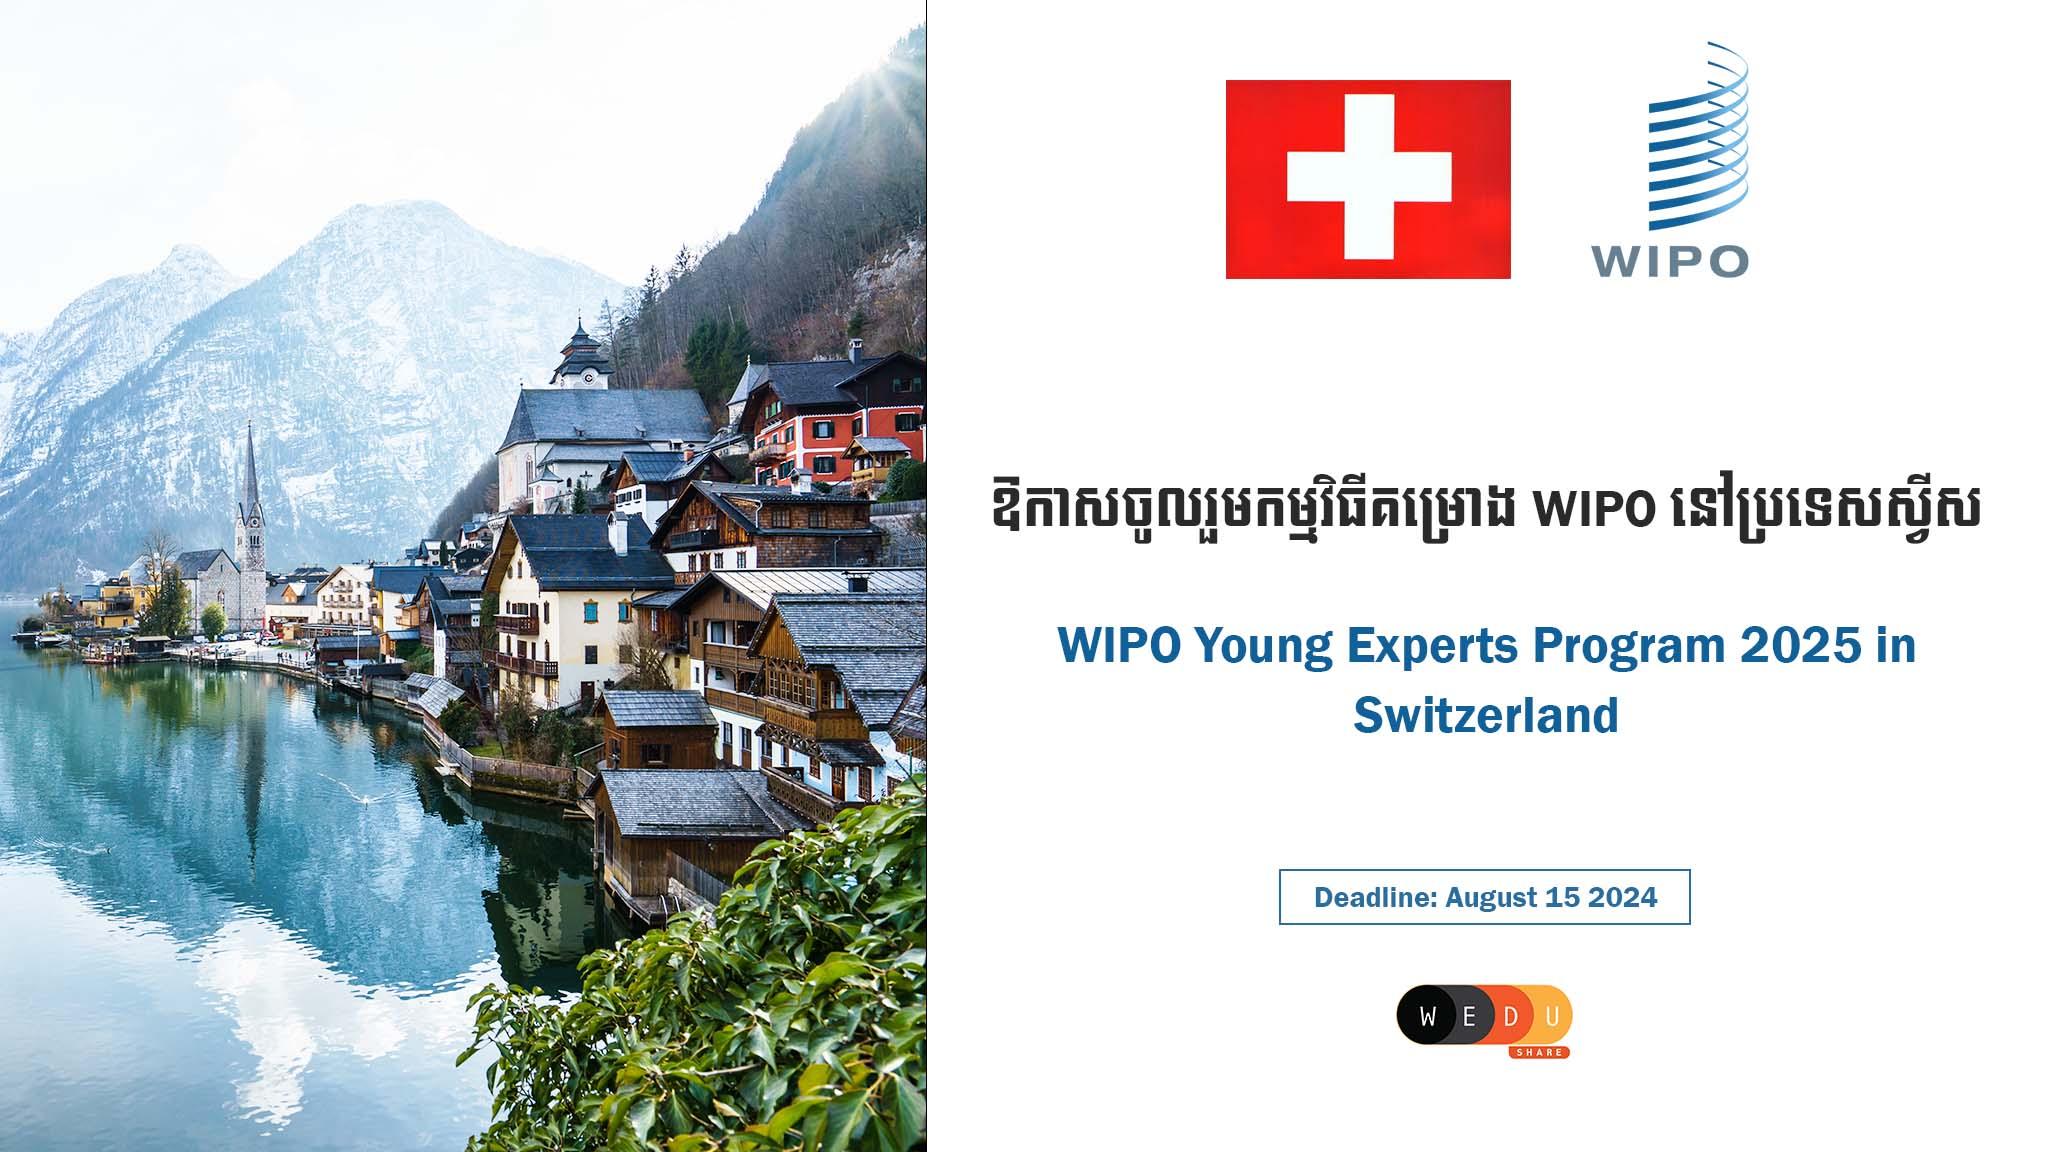 WIPO Young Experts Program 2025 in Switzerland